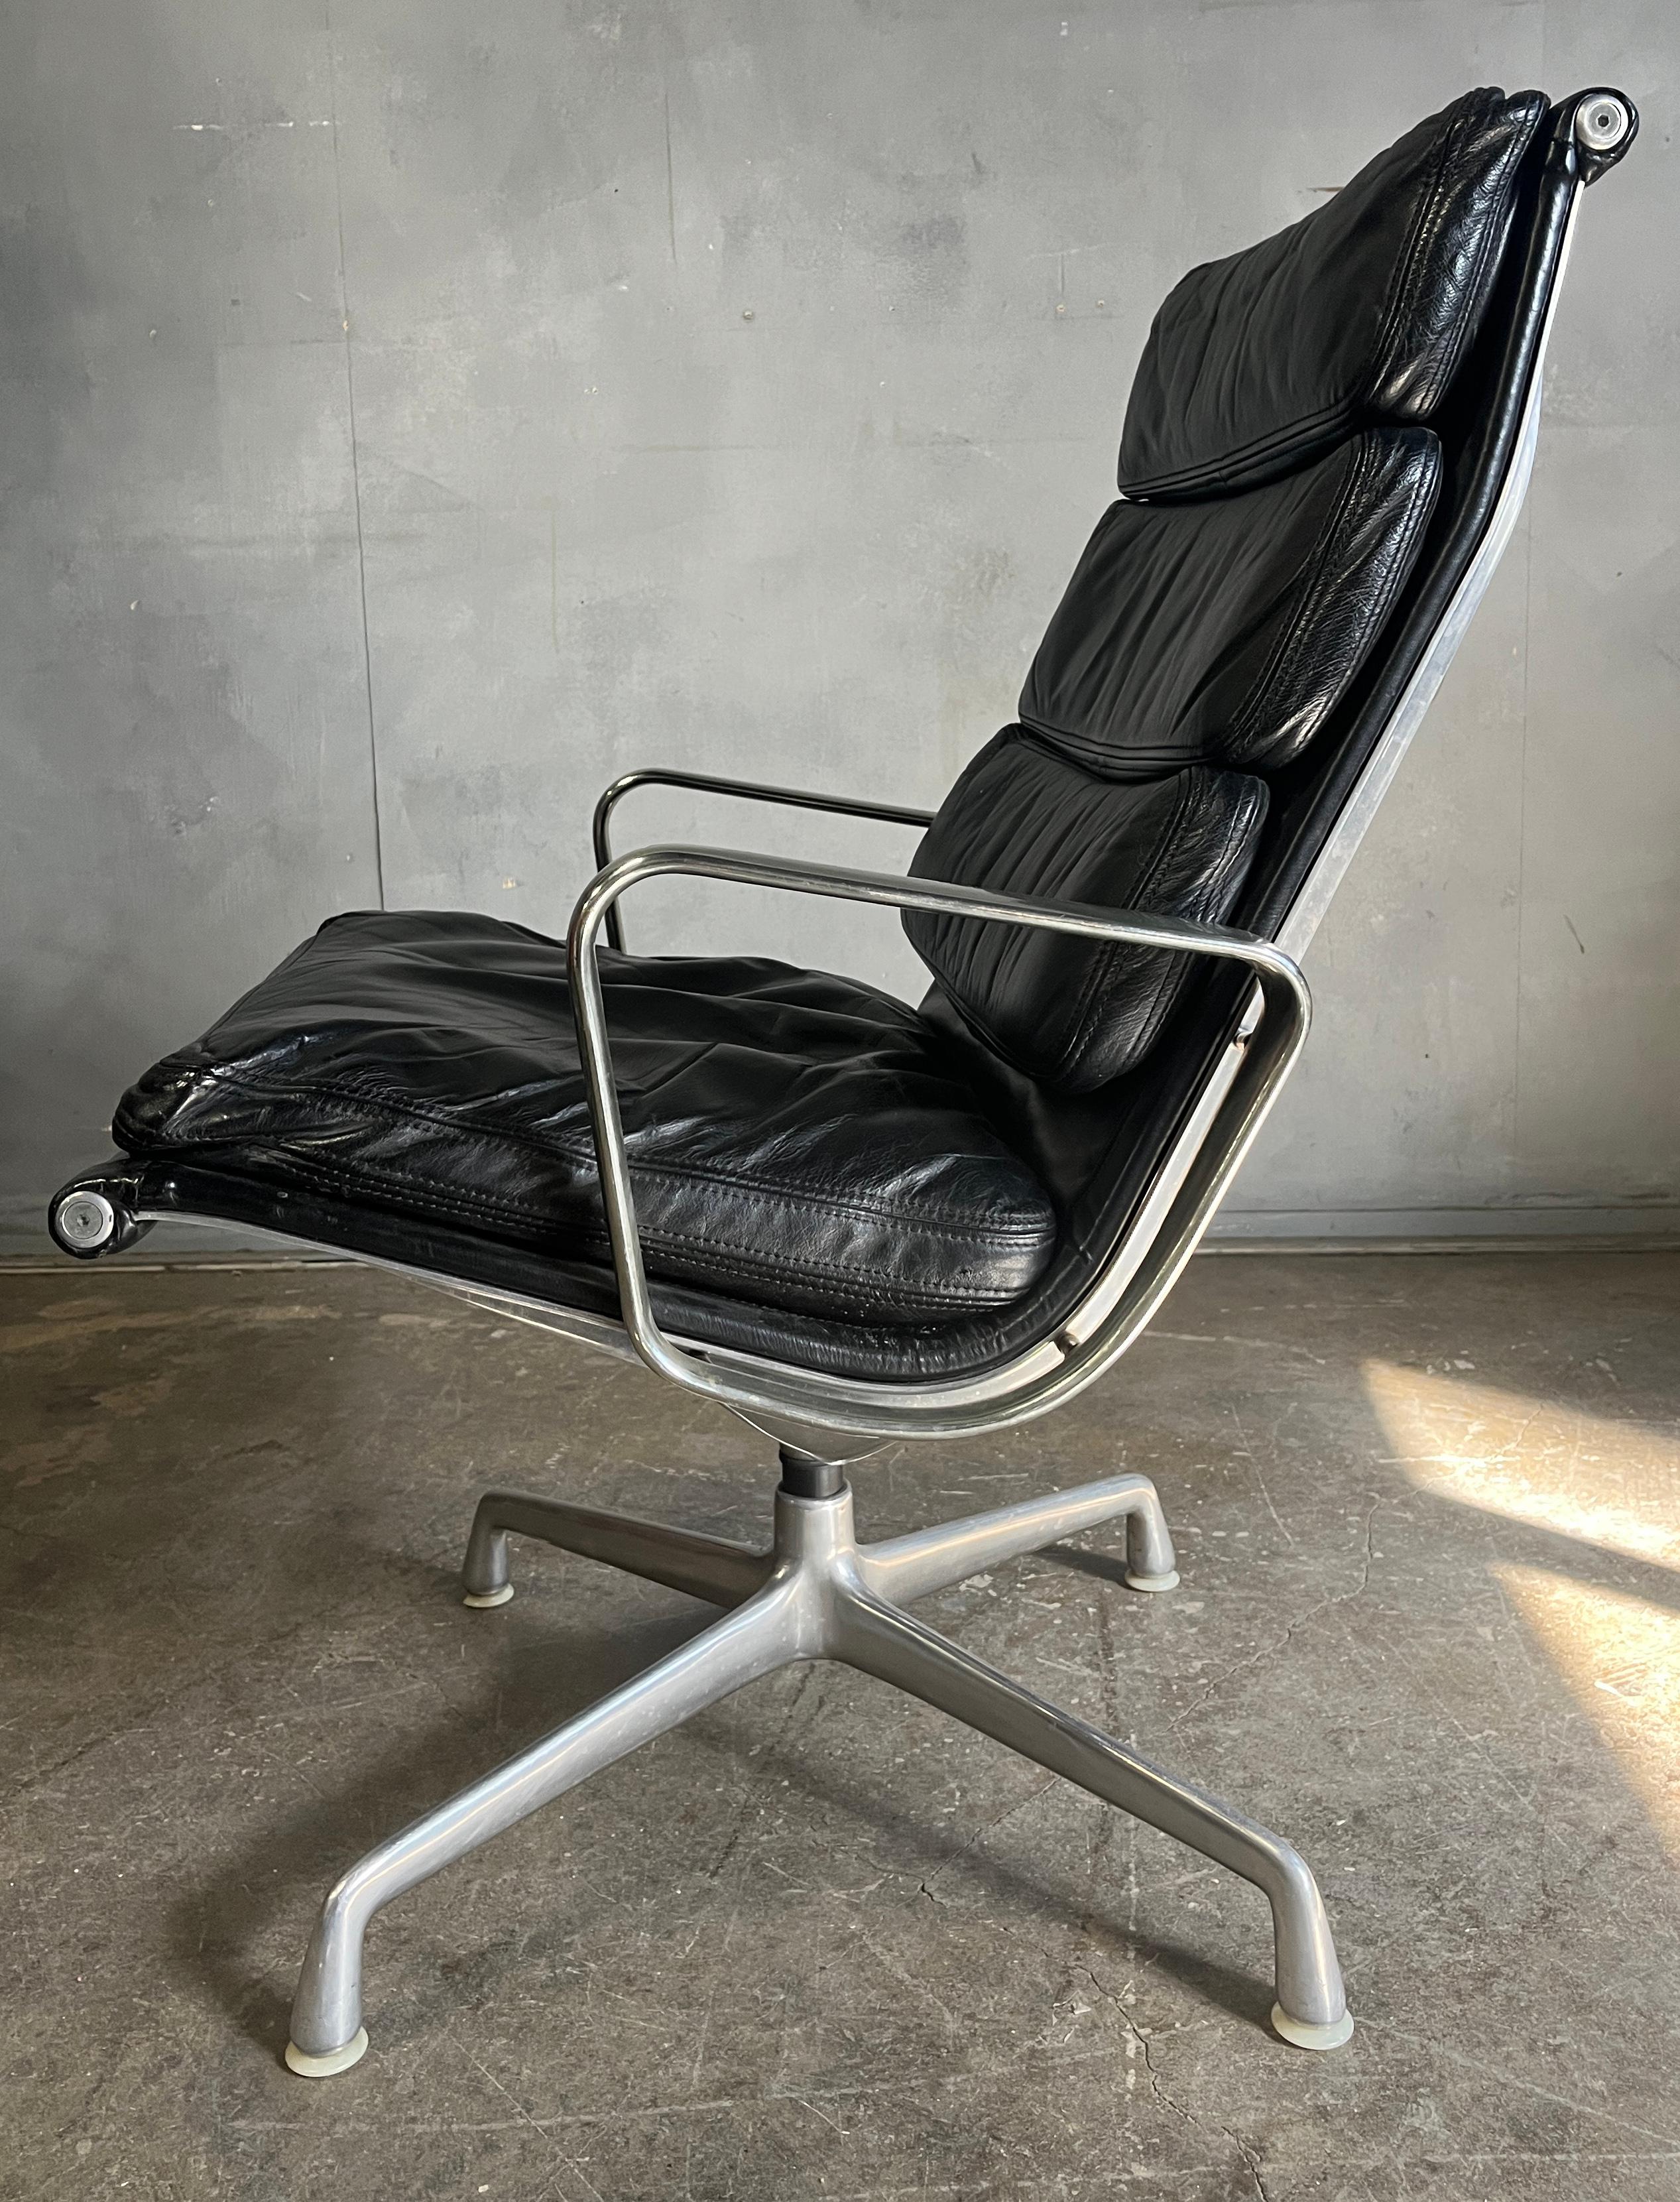 Eames black leather swivel soft pad lounge chair EA 216 by Eames for Herman Miller. Early edition in cast aluminium (not chrome). Original glides. Gorgeous wool back. Very nice patina and aluminum is great shape. Casting stamp dates this chair early